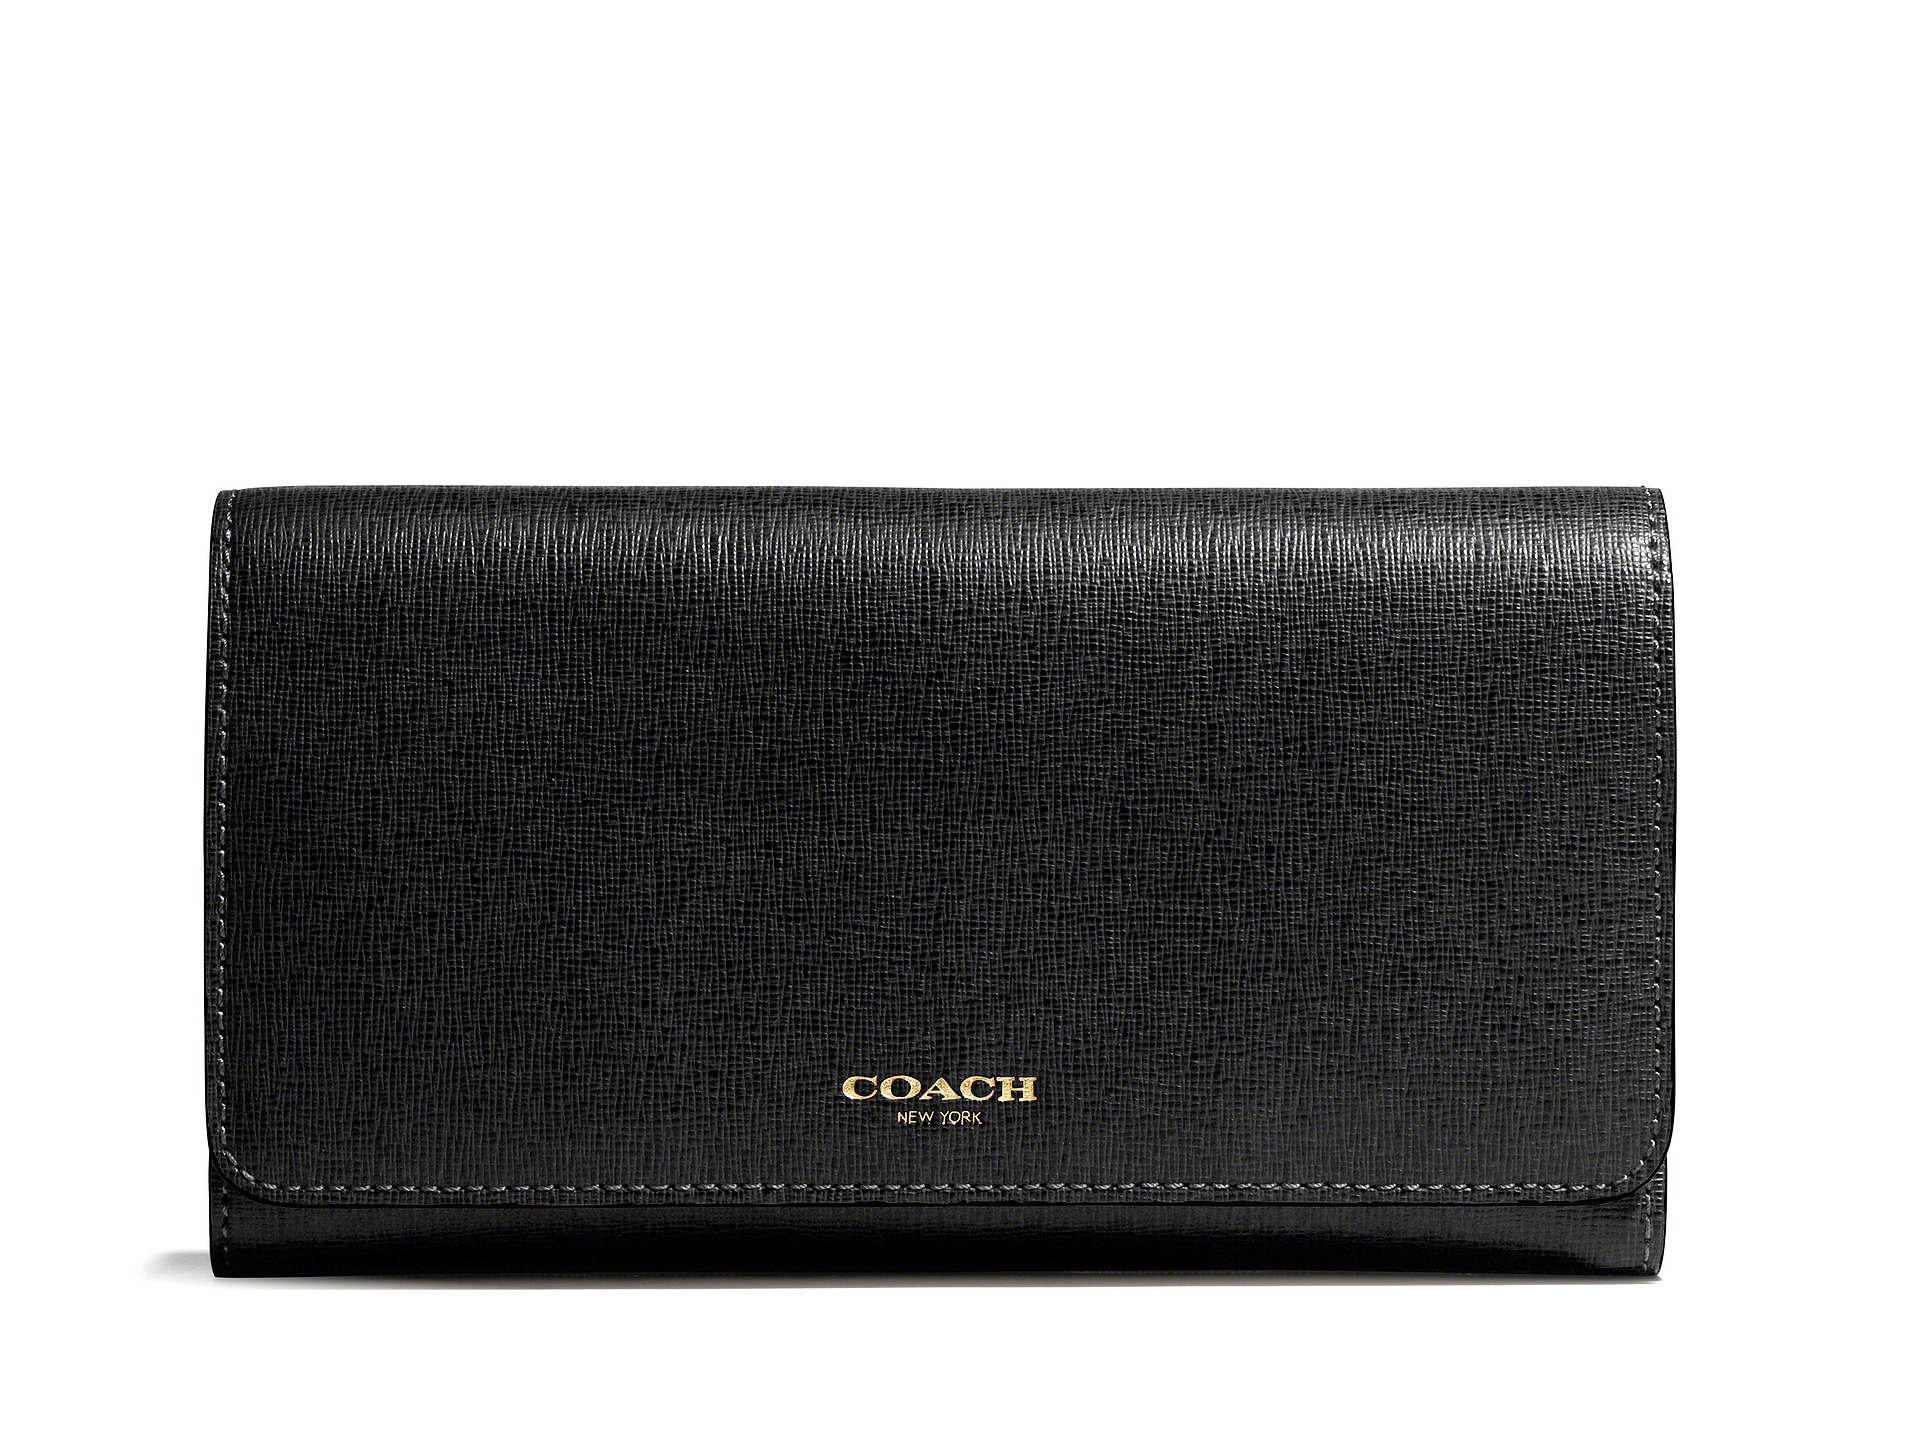 Coach Checkbook Wallet In Saffiano Leather | Shipped Free at Zappos